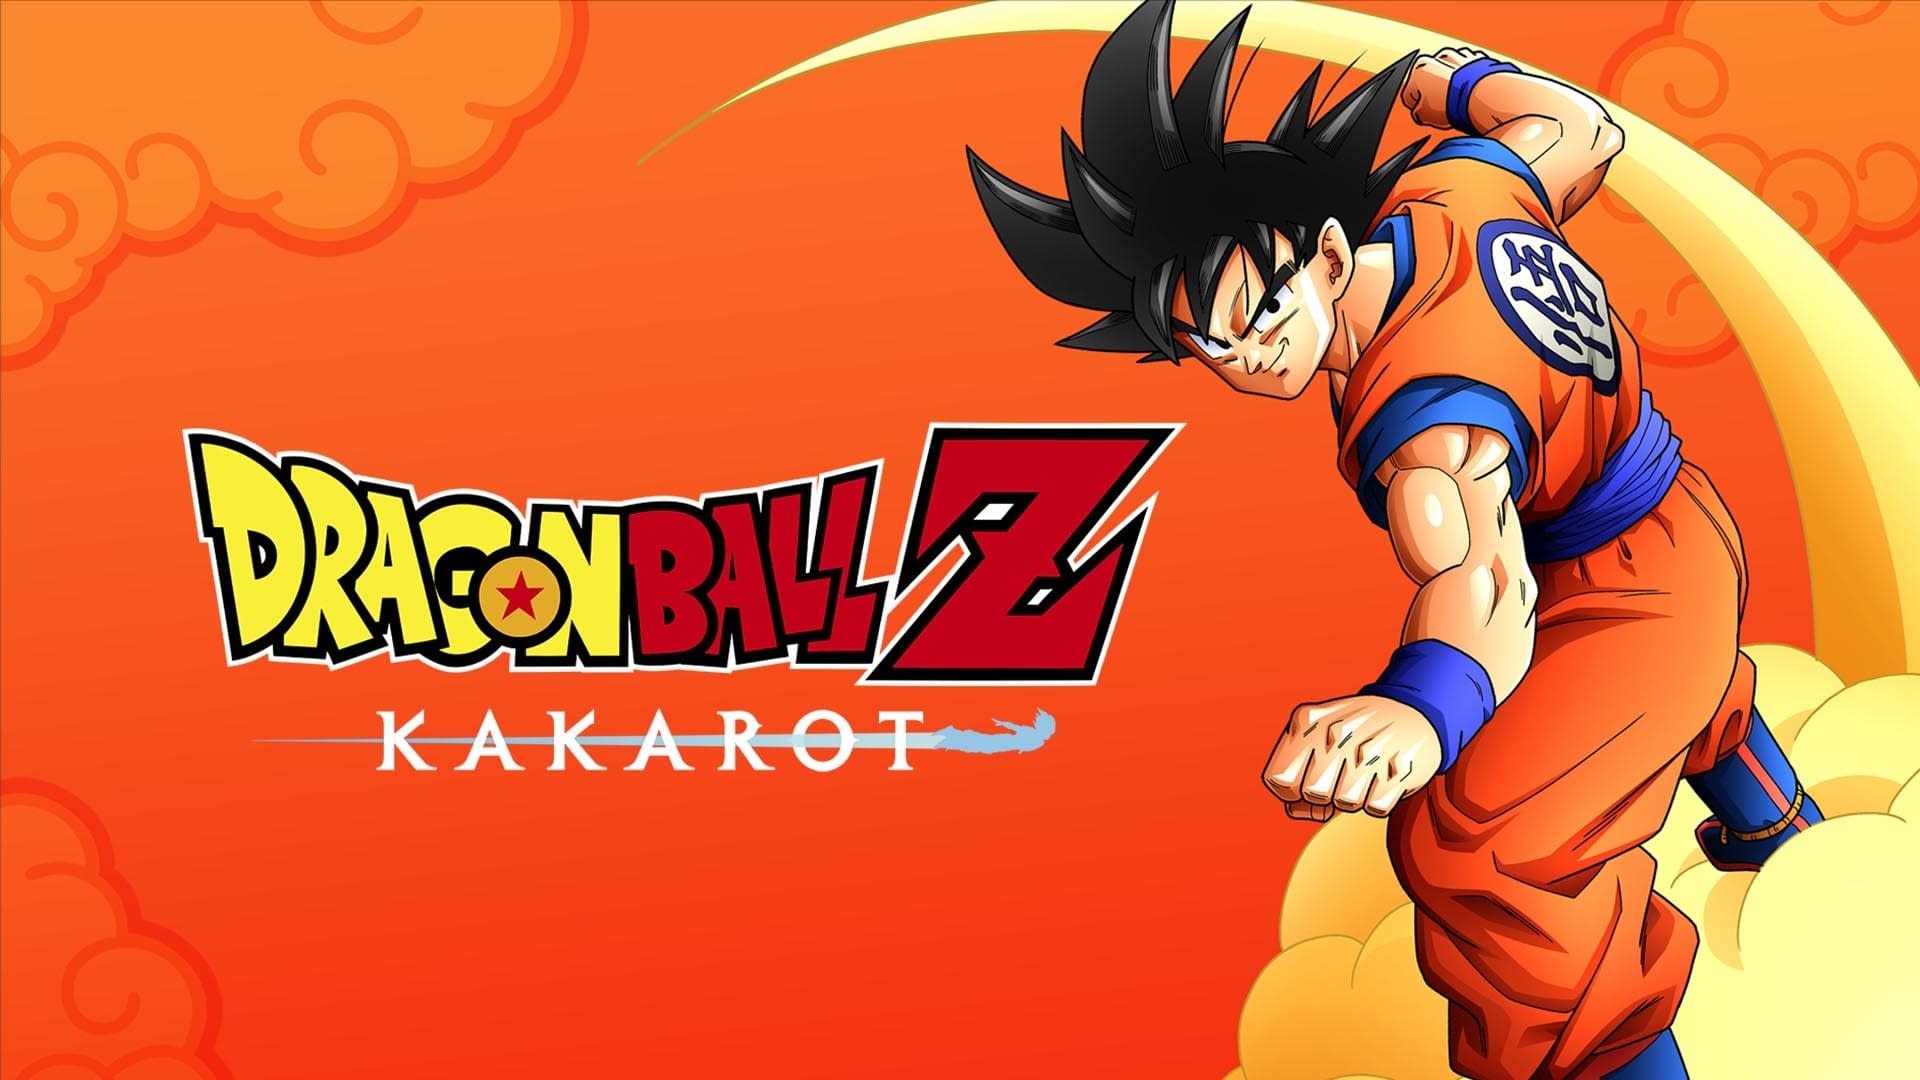 Dragon Ball Z: Kakarot Comes to the Next Generation of Consoles in 2023